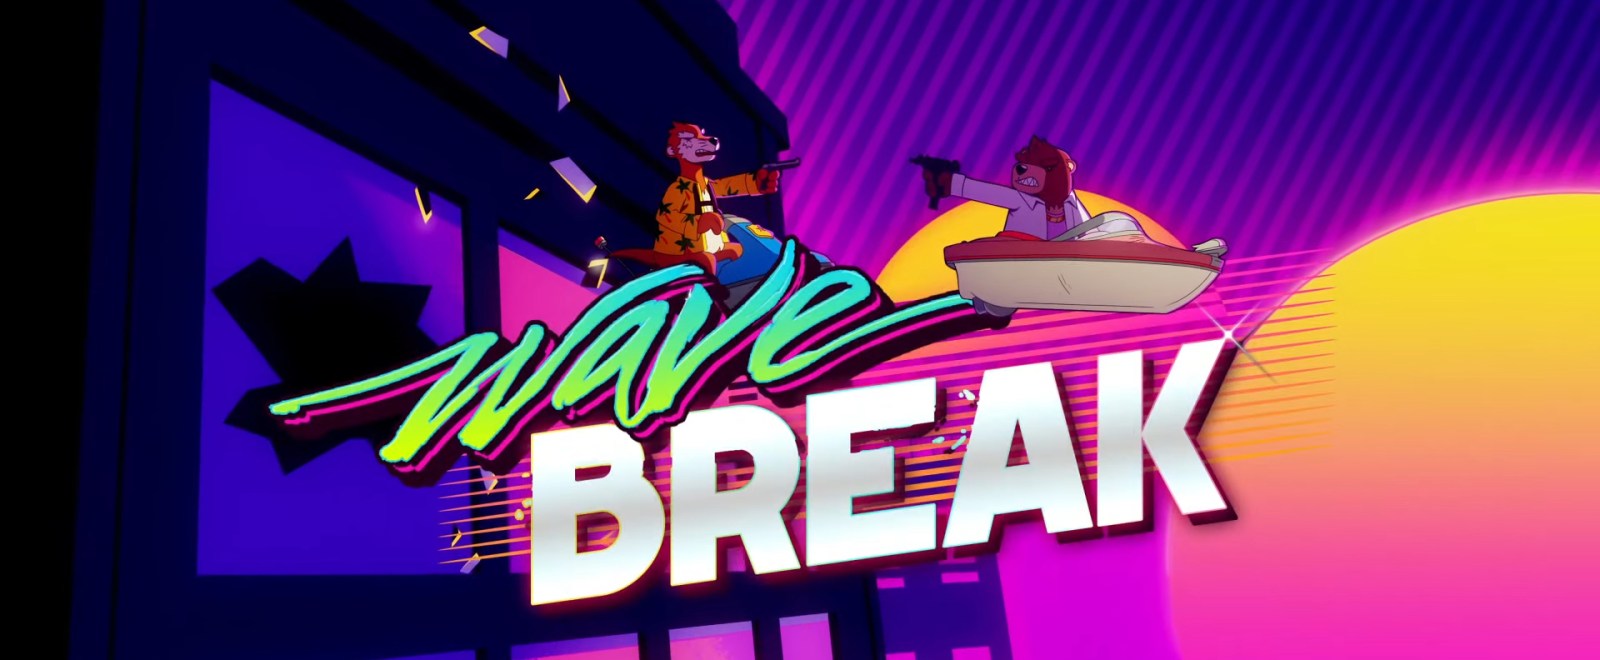 Wave Break Is The World S First Skateboating Game And It Looks Rad As Hell - roblox song id the lone raver